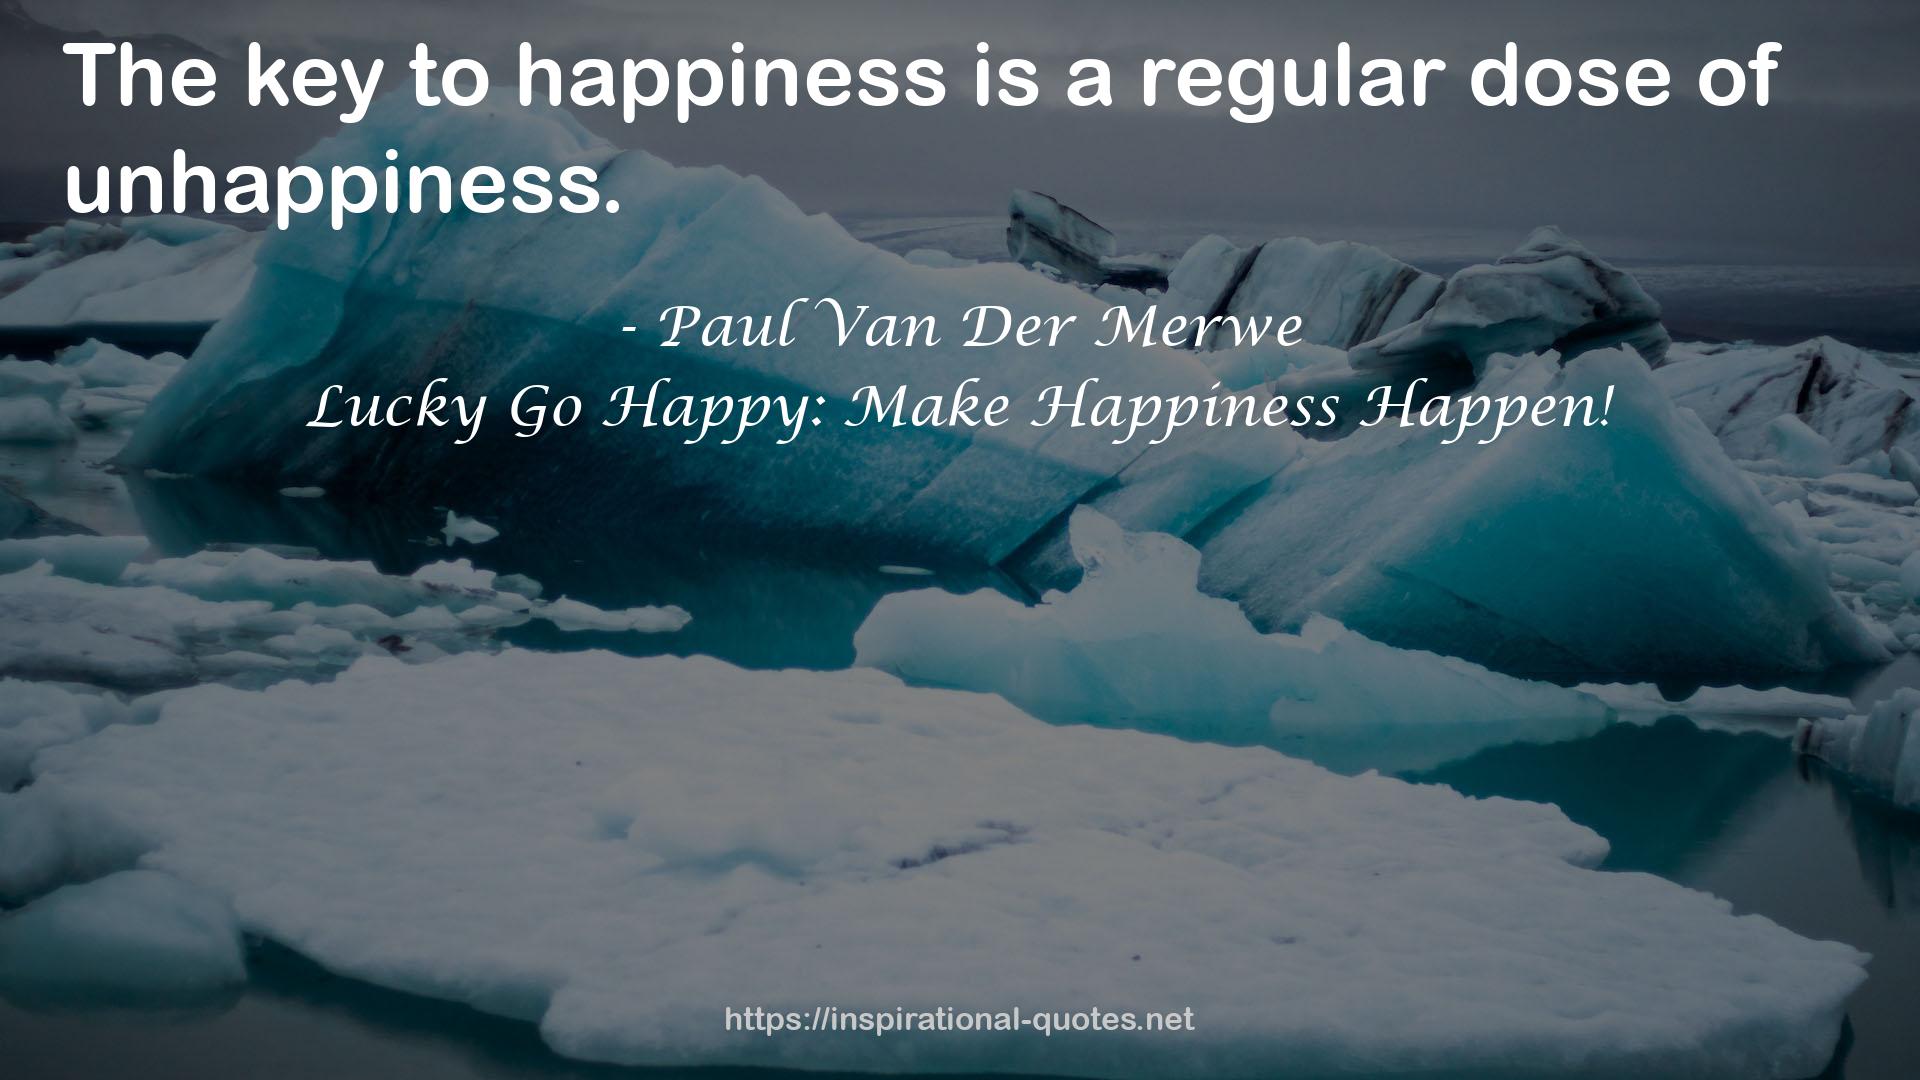 Lucky Go Happy: Make Happiness Happen! QUOTES